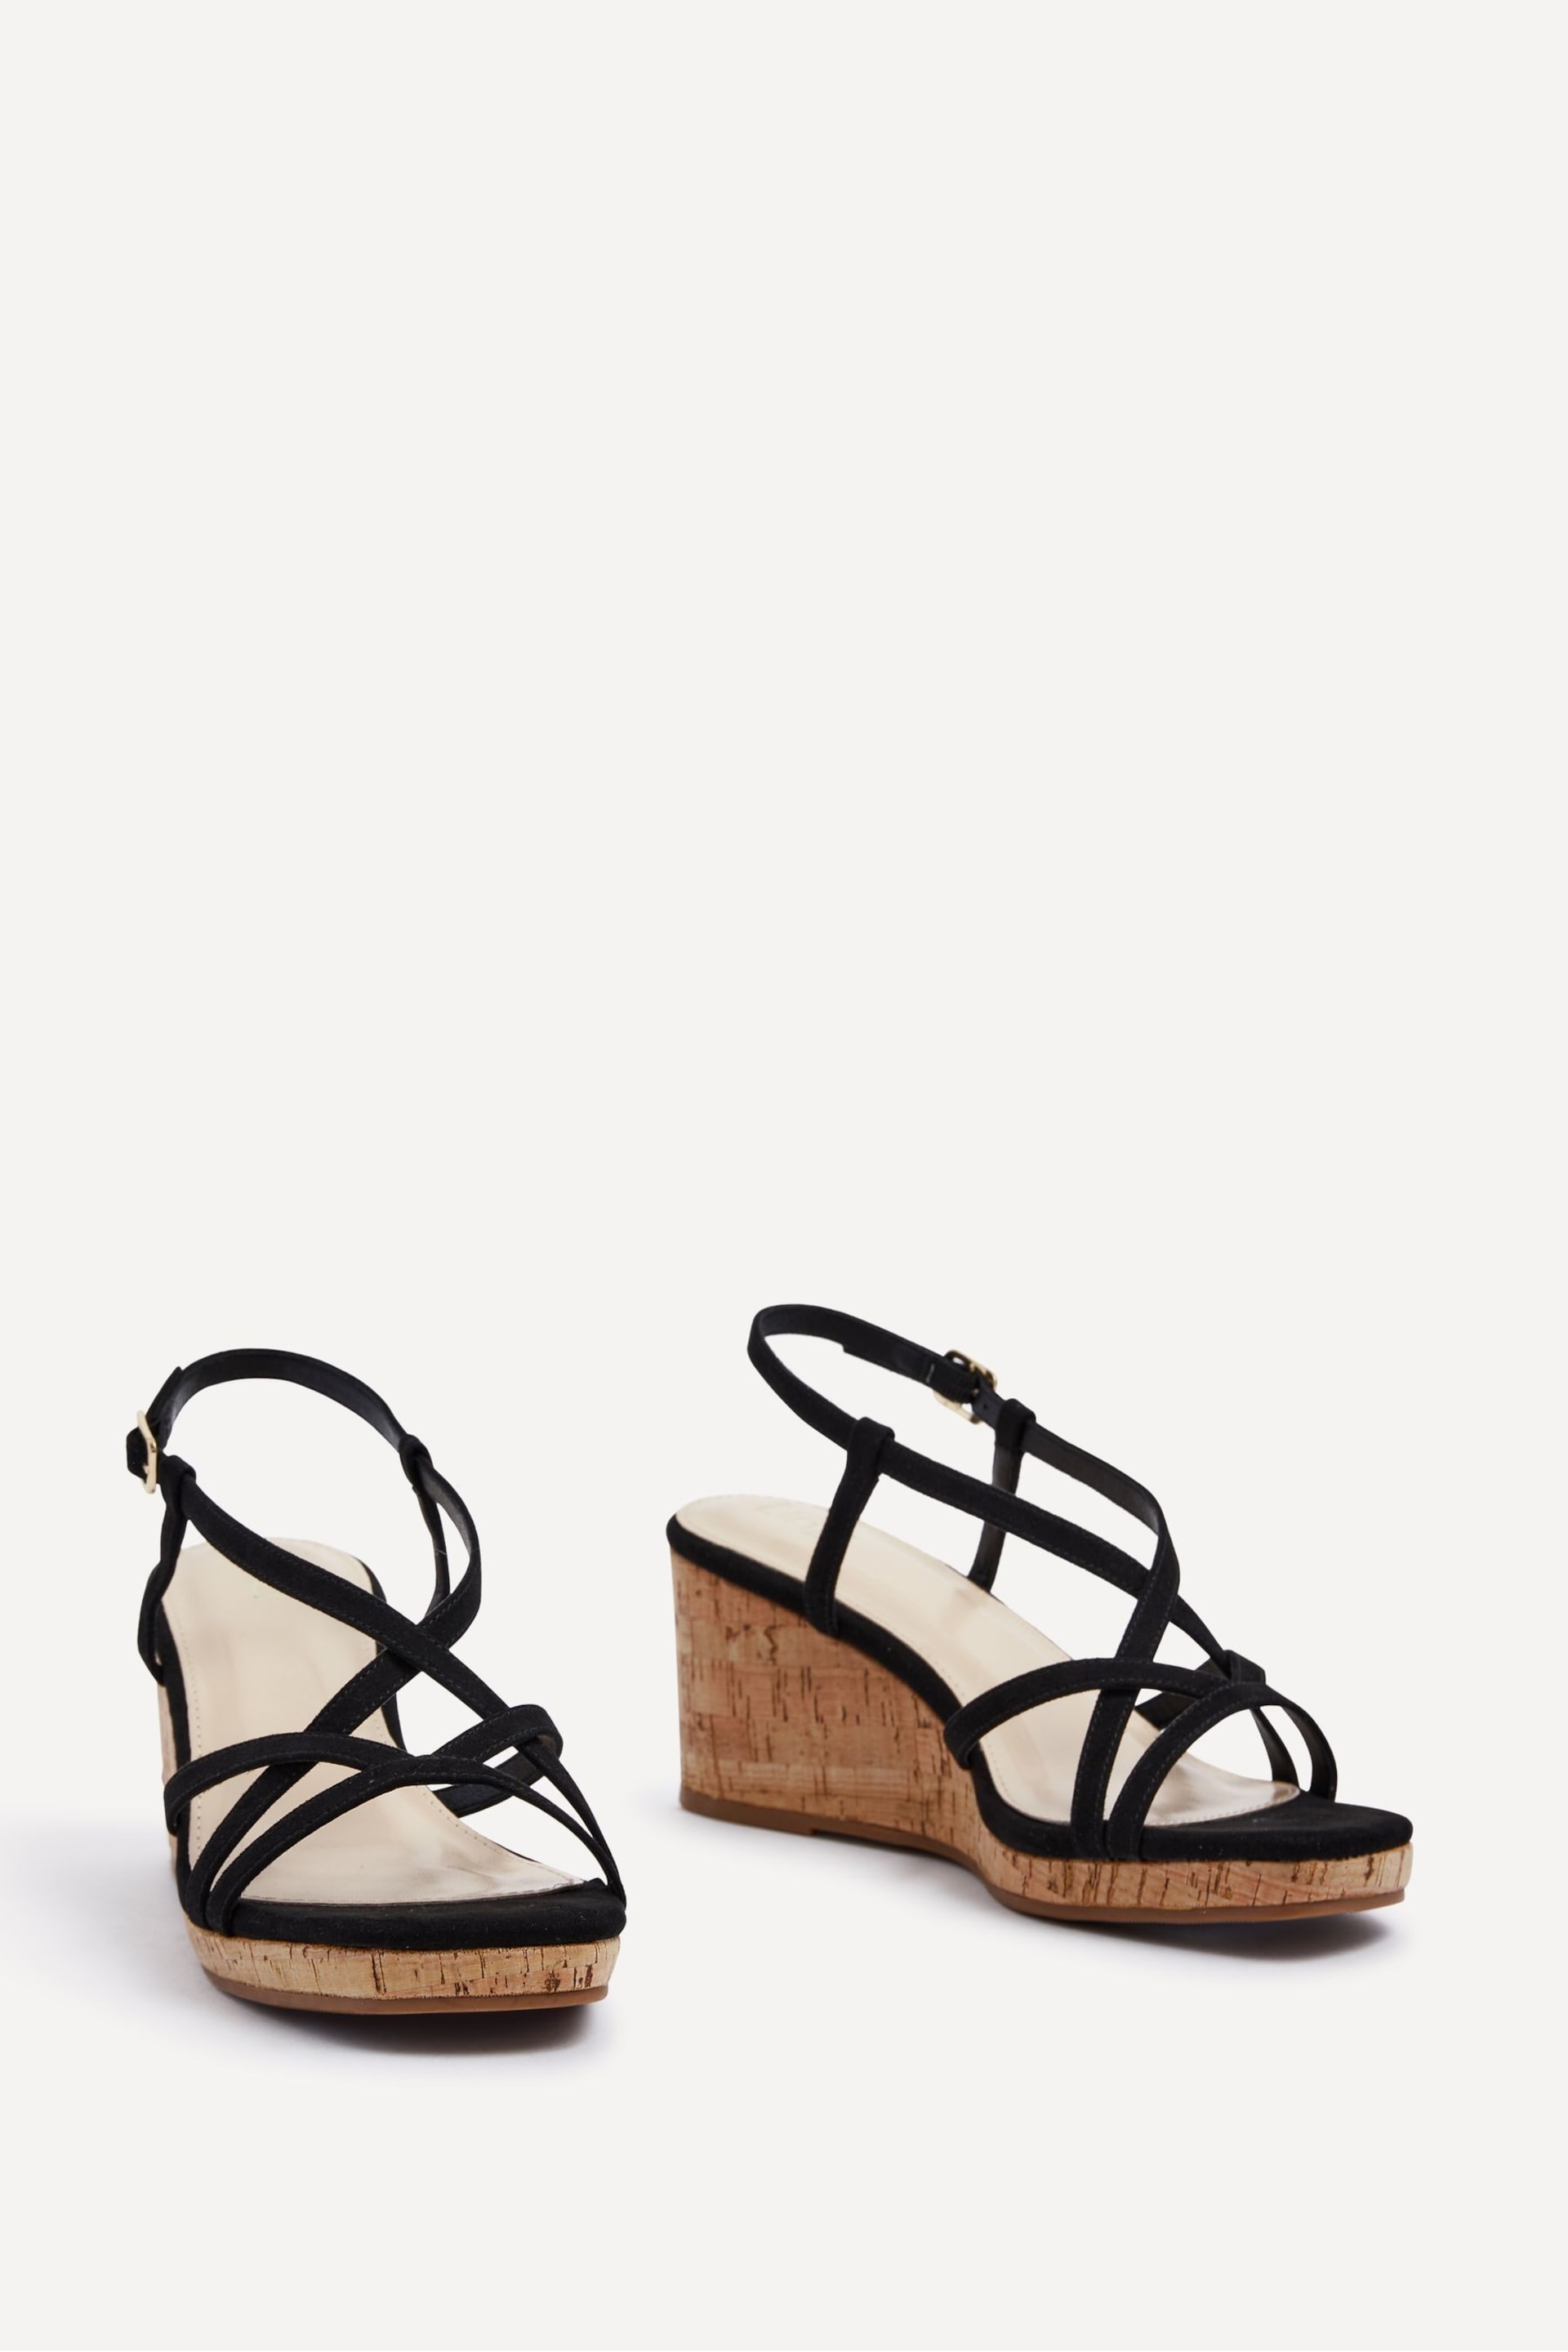 Linzi Black Safiya Strappy Wedge Sandals With Wrap Around Ankle Strap - Image 3 of 5